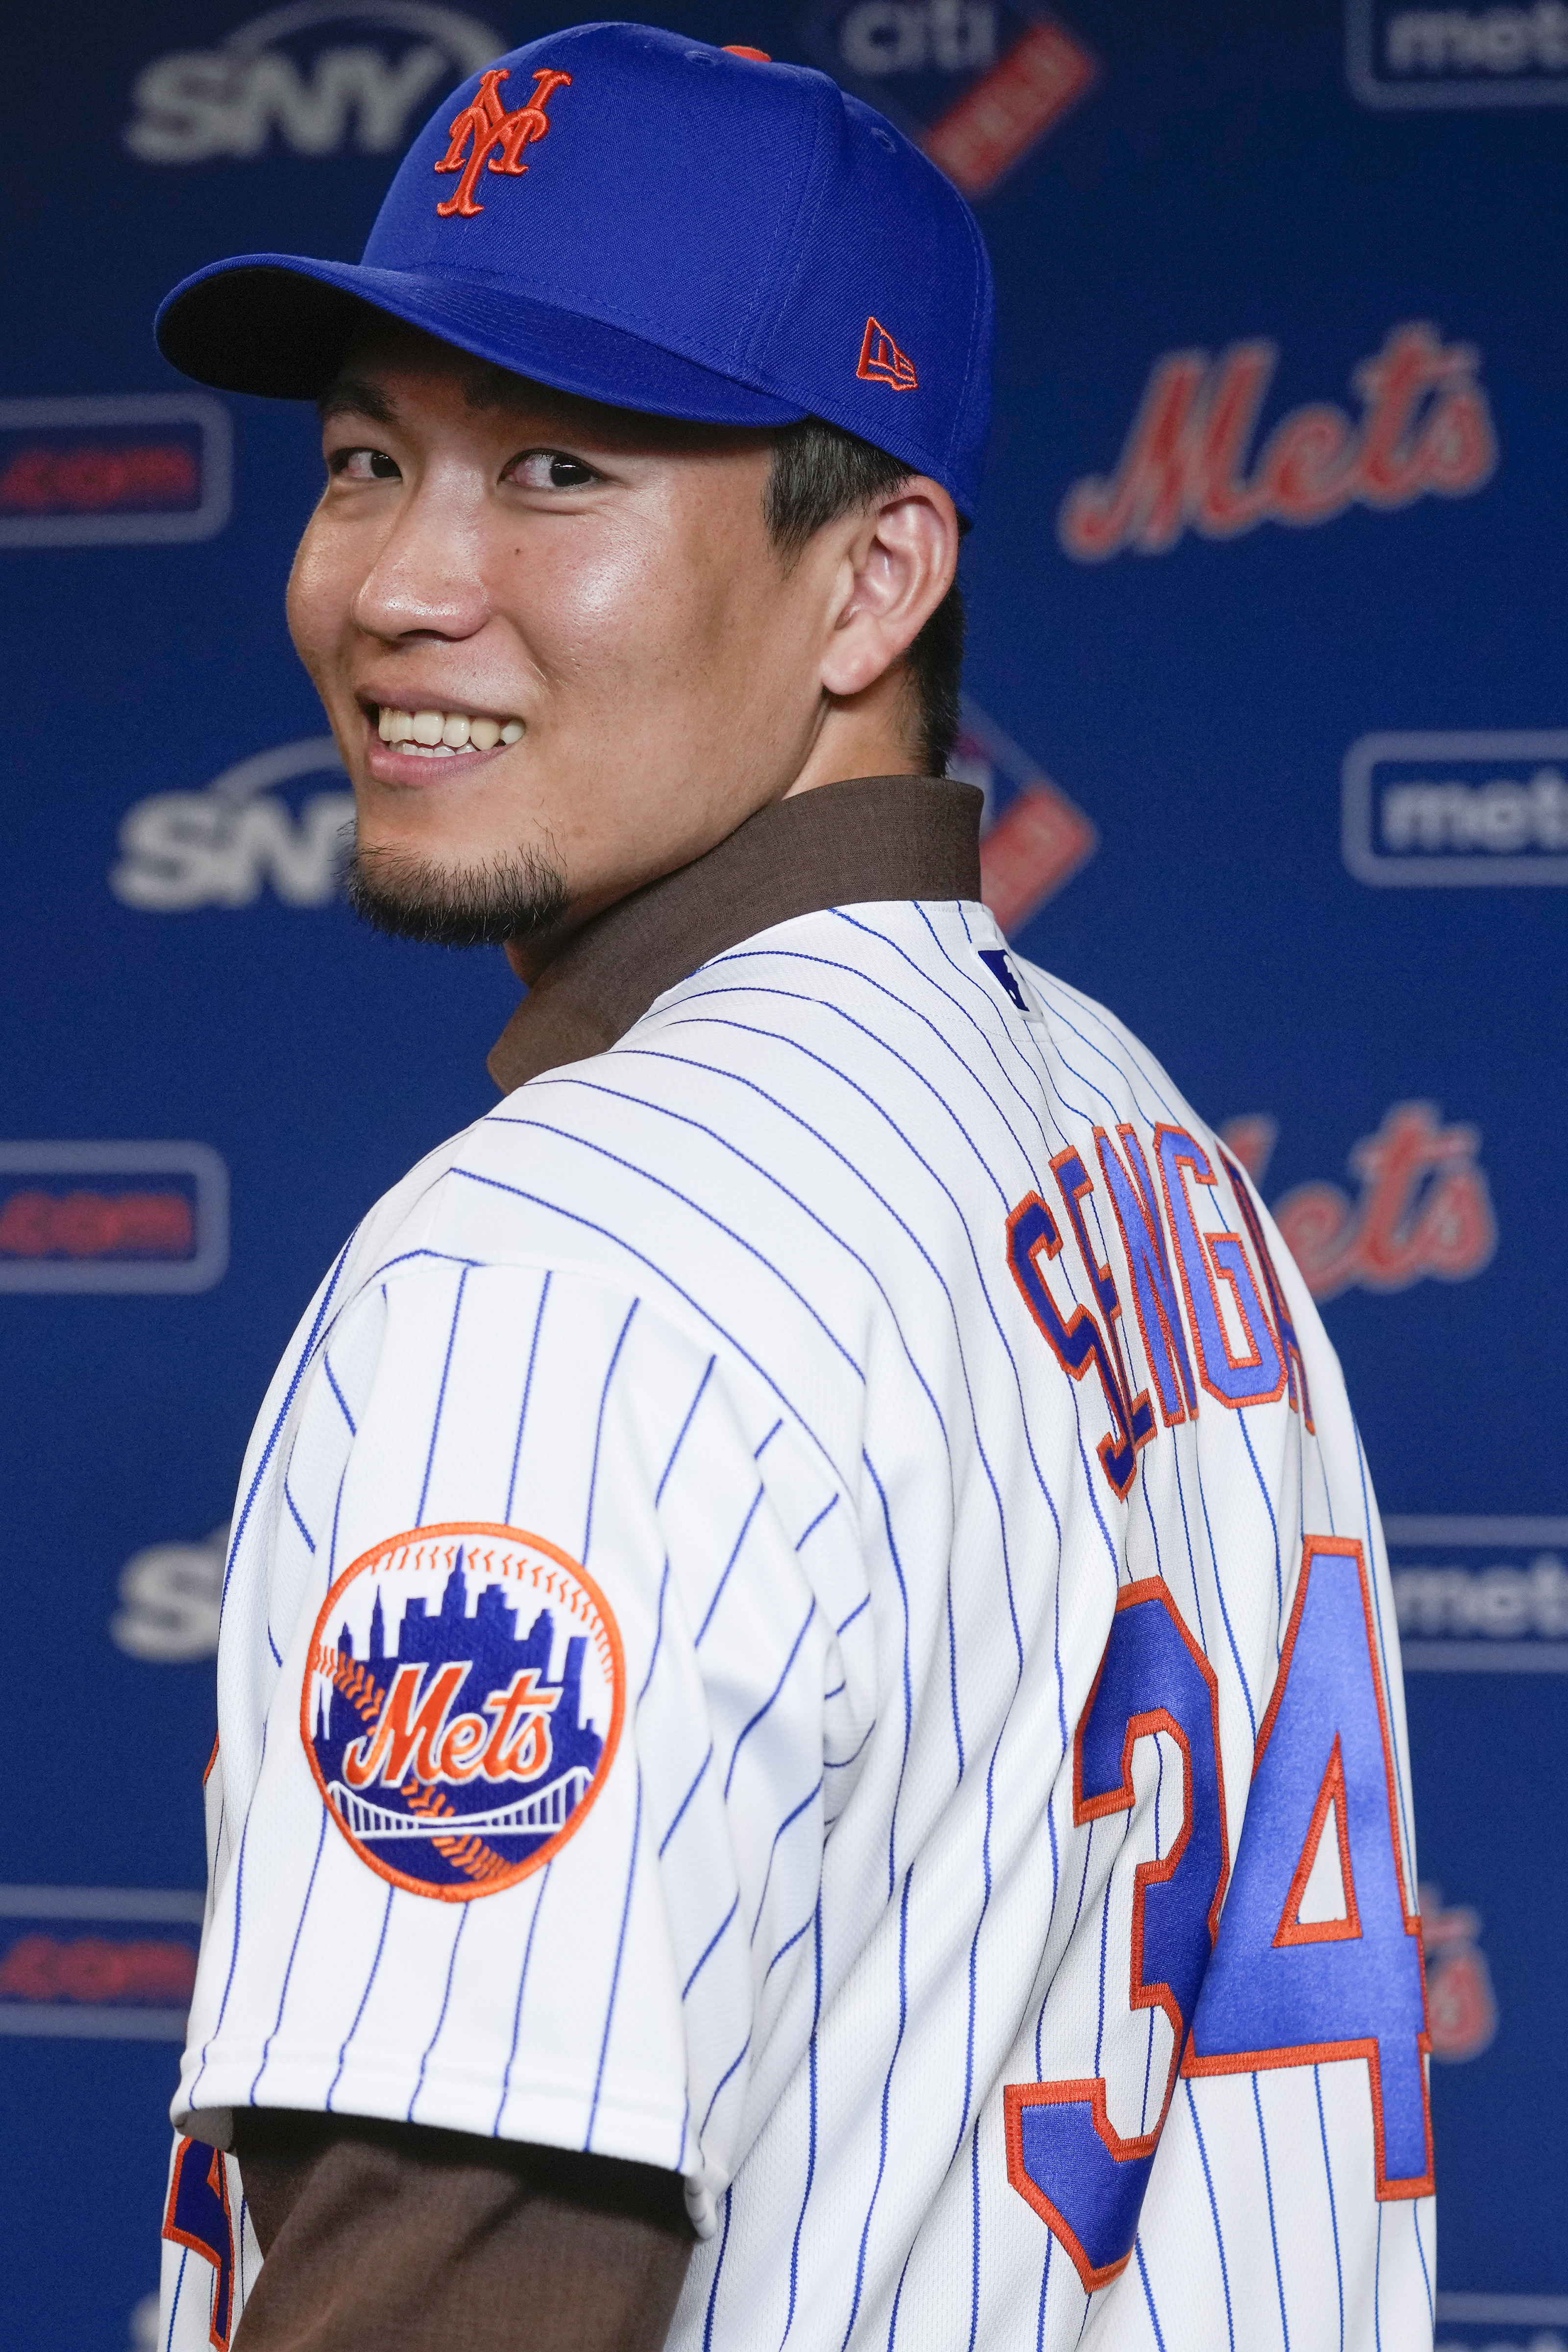 Mets News: The Mets are signing Senga to a five-year, $75 million